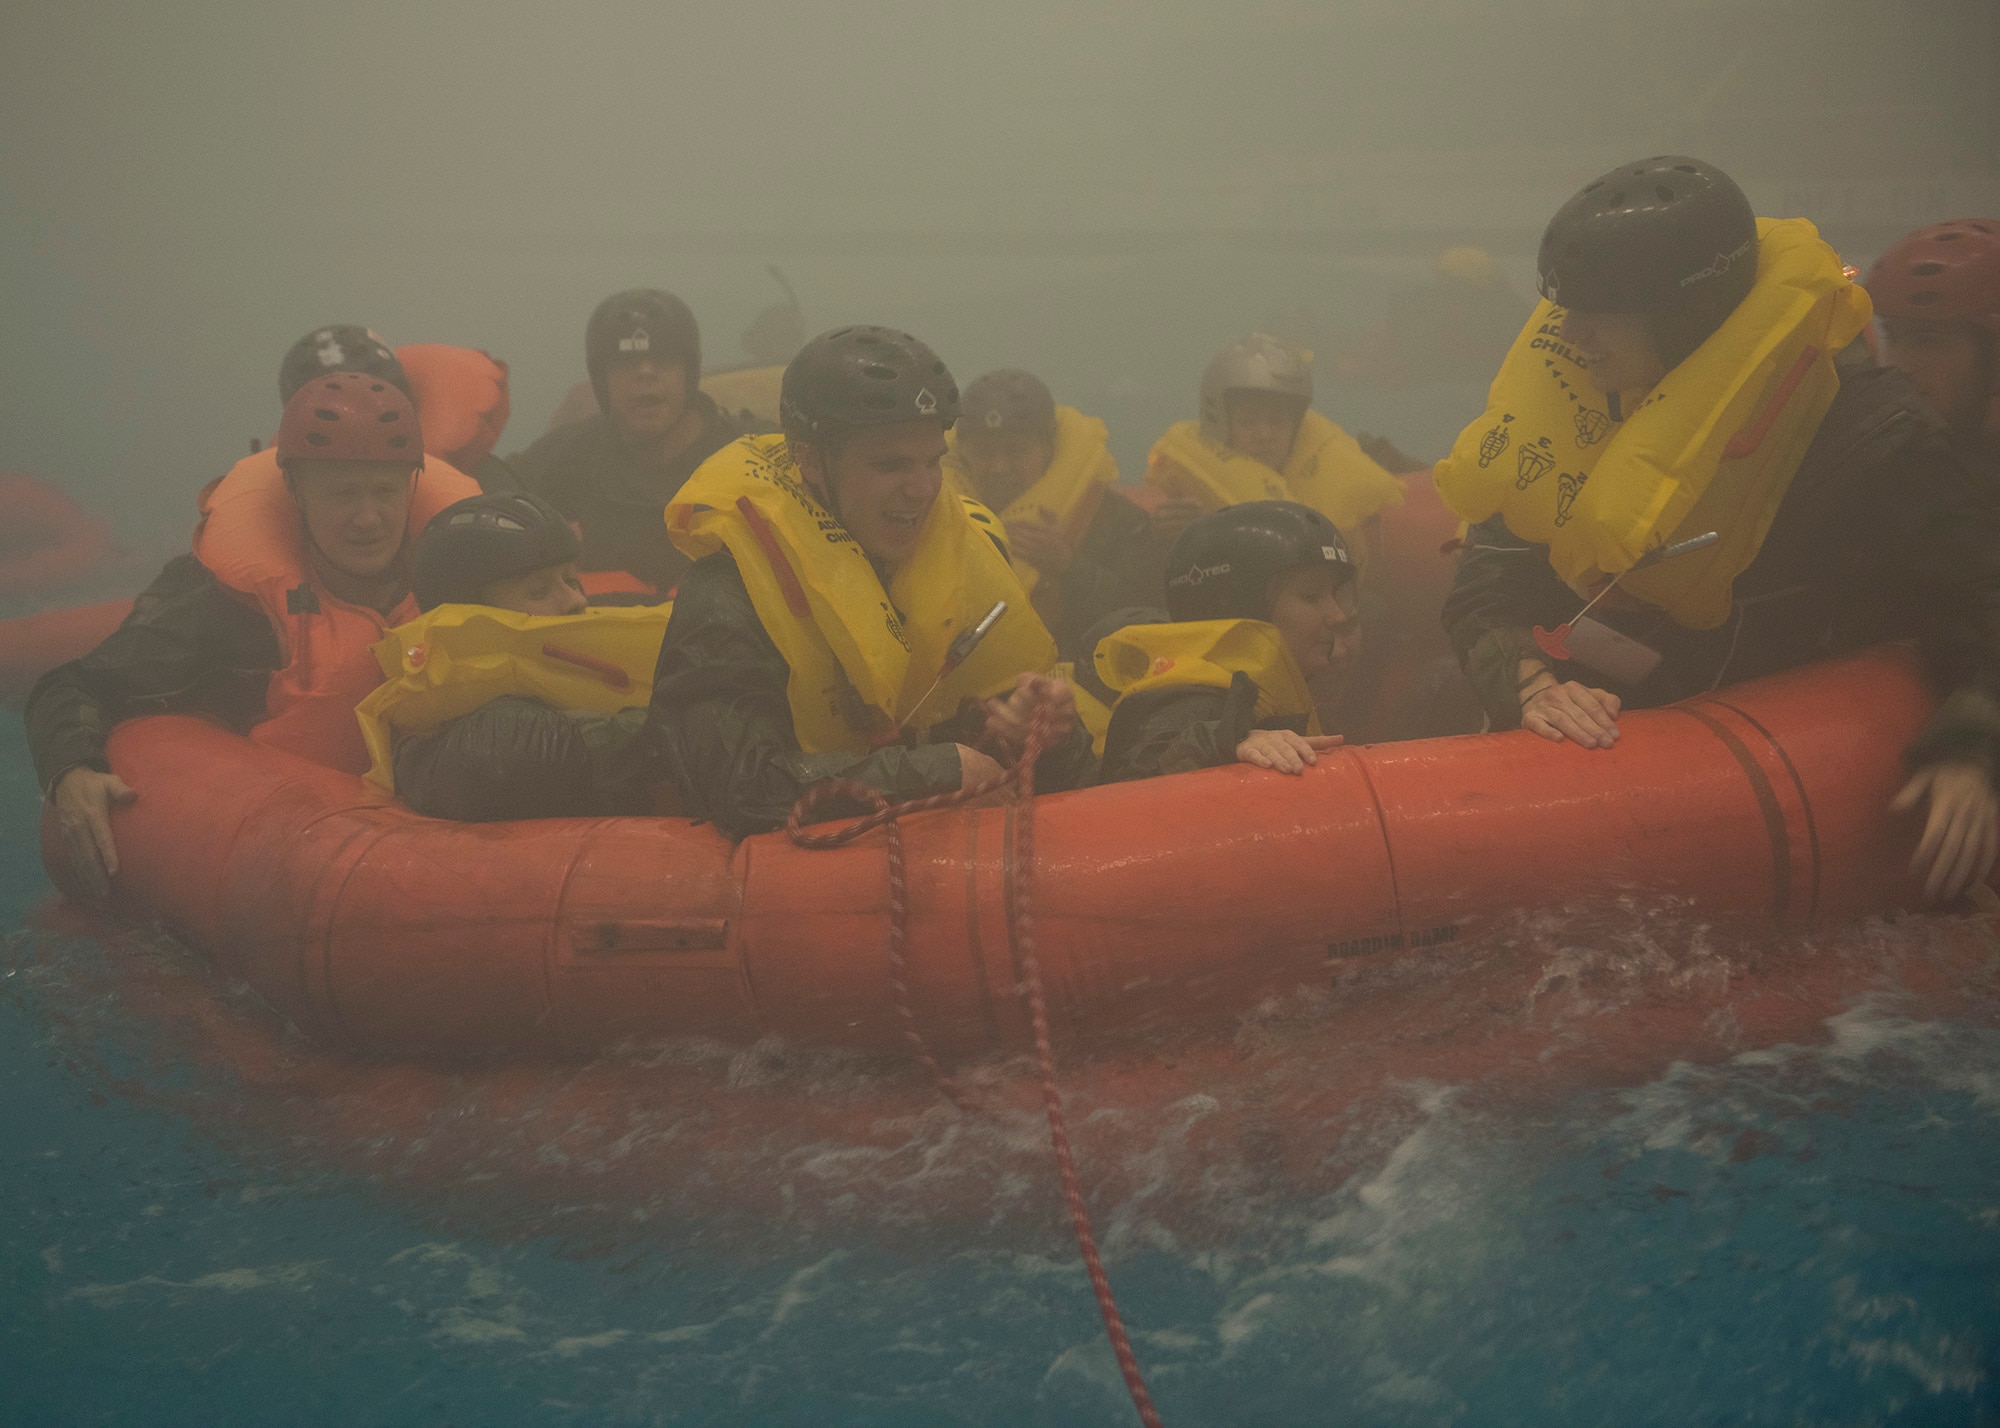 NASA astronauts and Survival School students work to maneuver their life raft against simulated waves during a training session Feb. 10, 2017, at Fairchild Air Force Base, Wash. Survival School students are given experiences as close to real life emergency situations as possible. (U.S. Air Force photo/ Airman 1st Class Ryan Lackey)